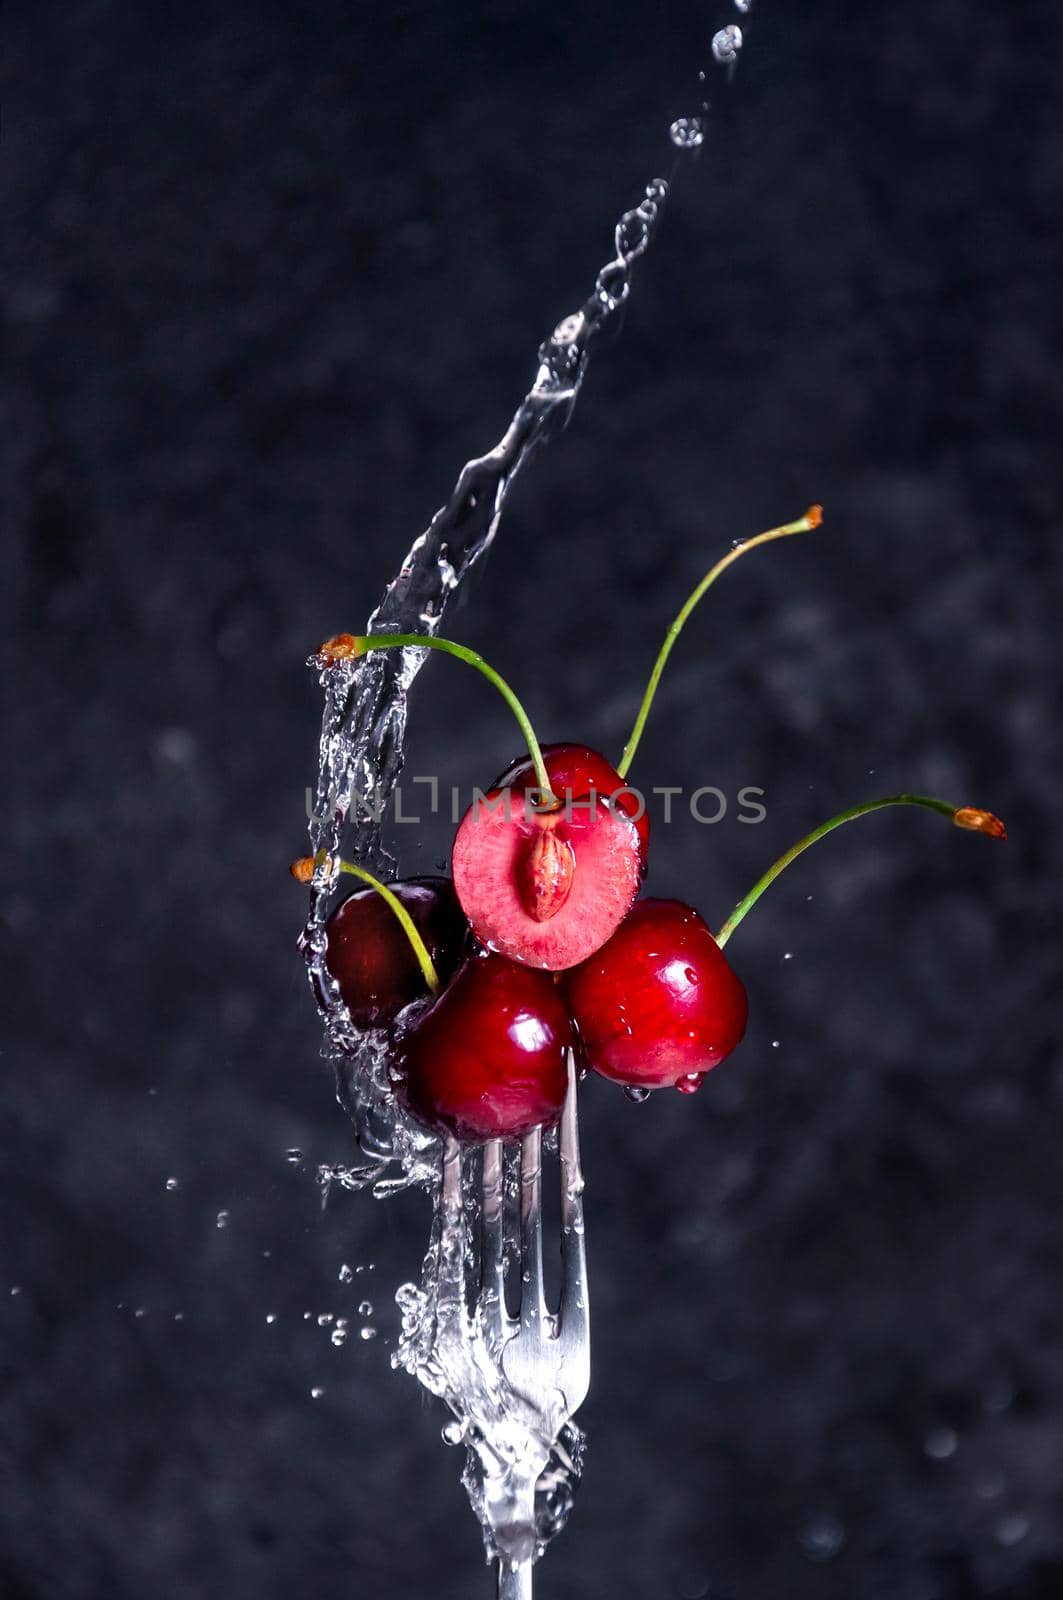 Close up Composition of Cherries on Fork Flying in the air with Water Splashes on the Dark Background.